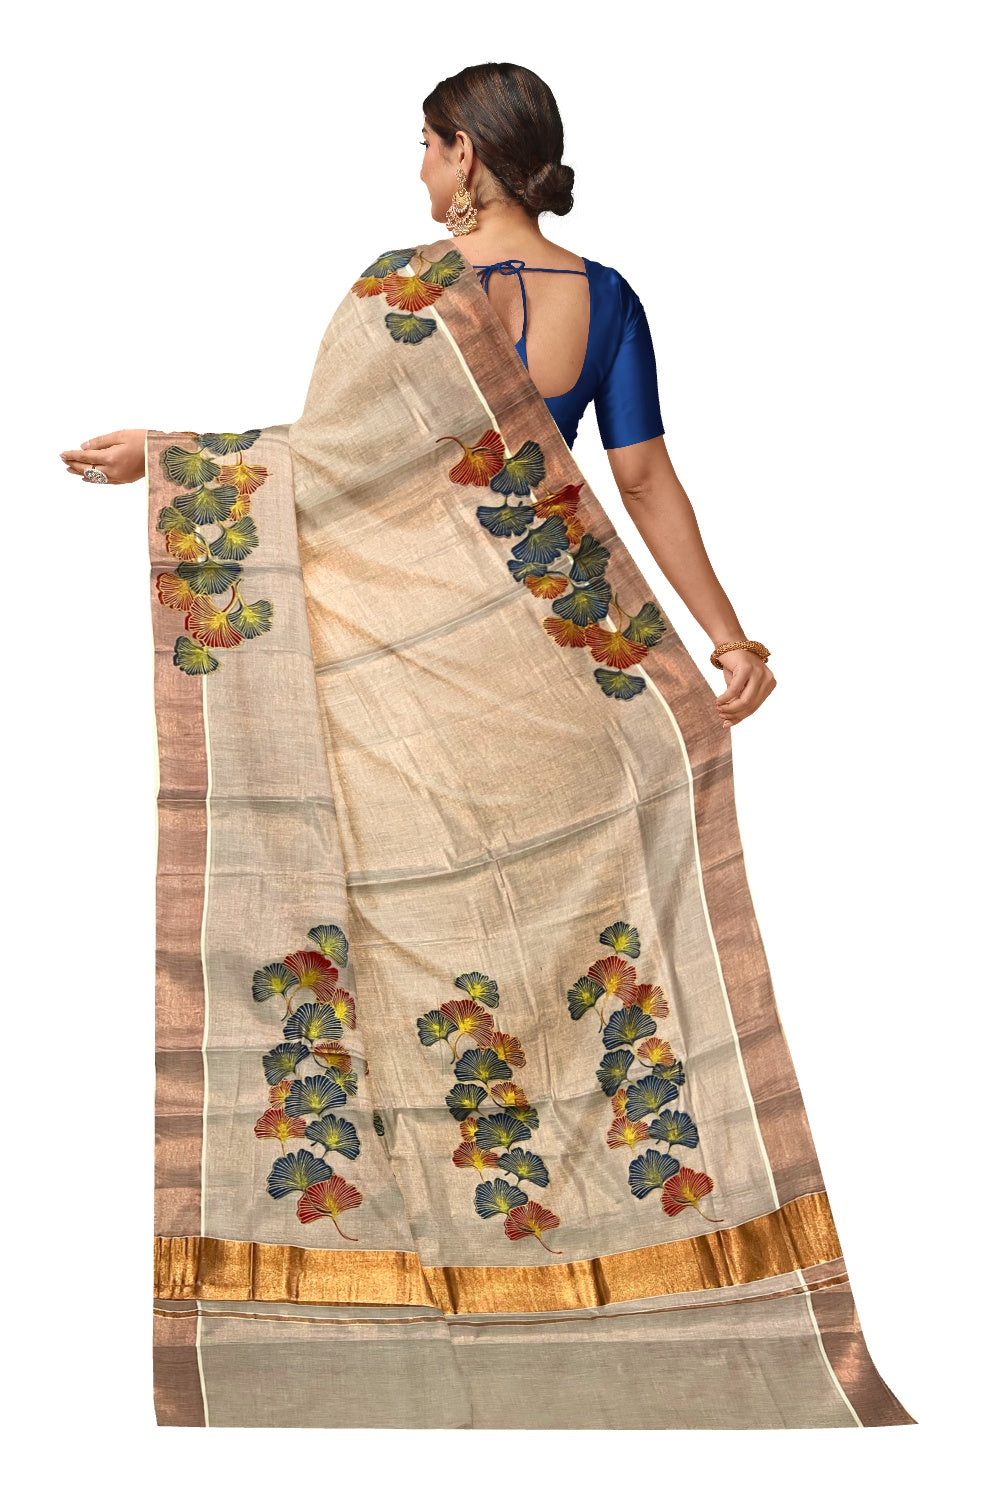 Kerala Copper Tissue Kasavu Saree With Mural Printed Blue and Red Floral Design